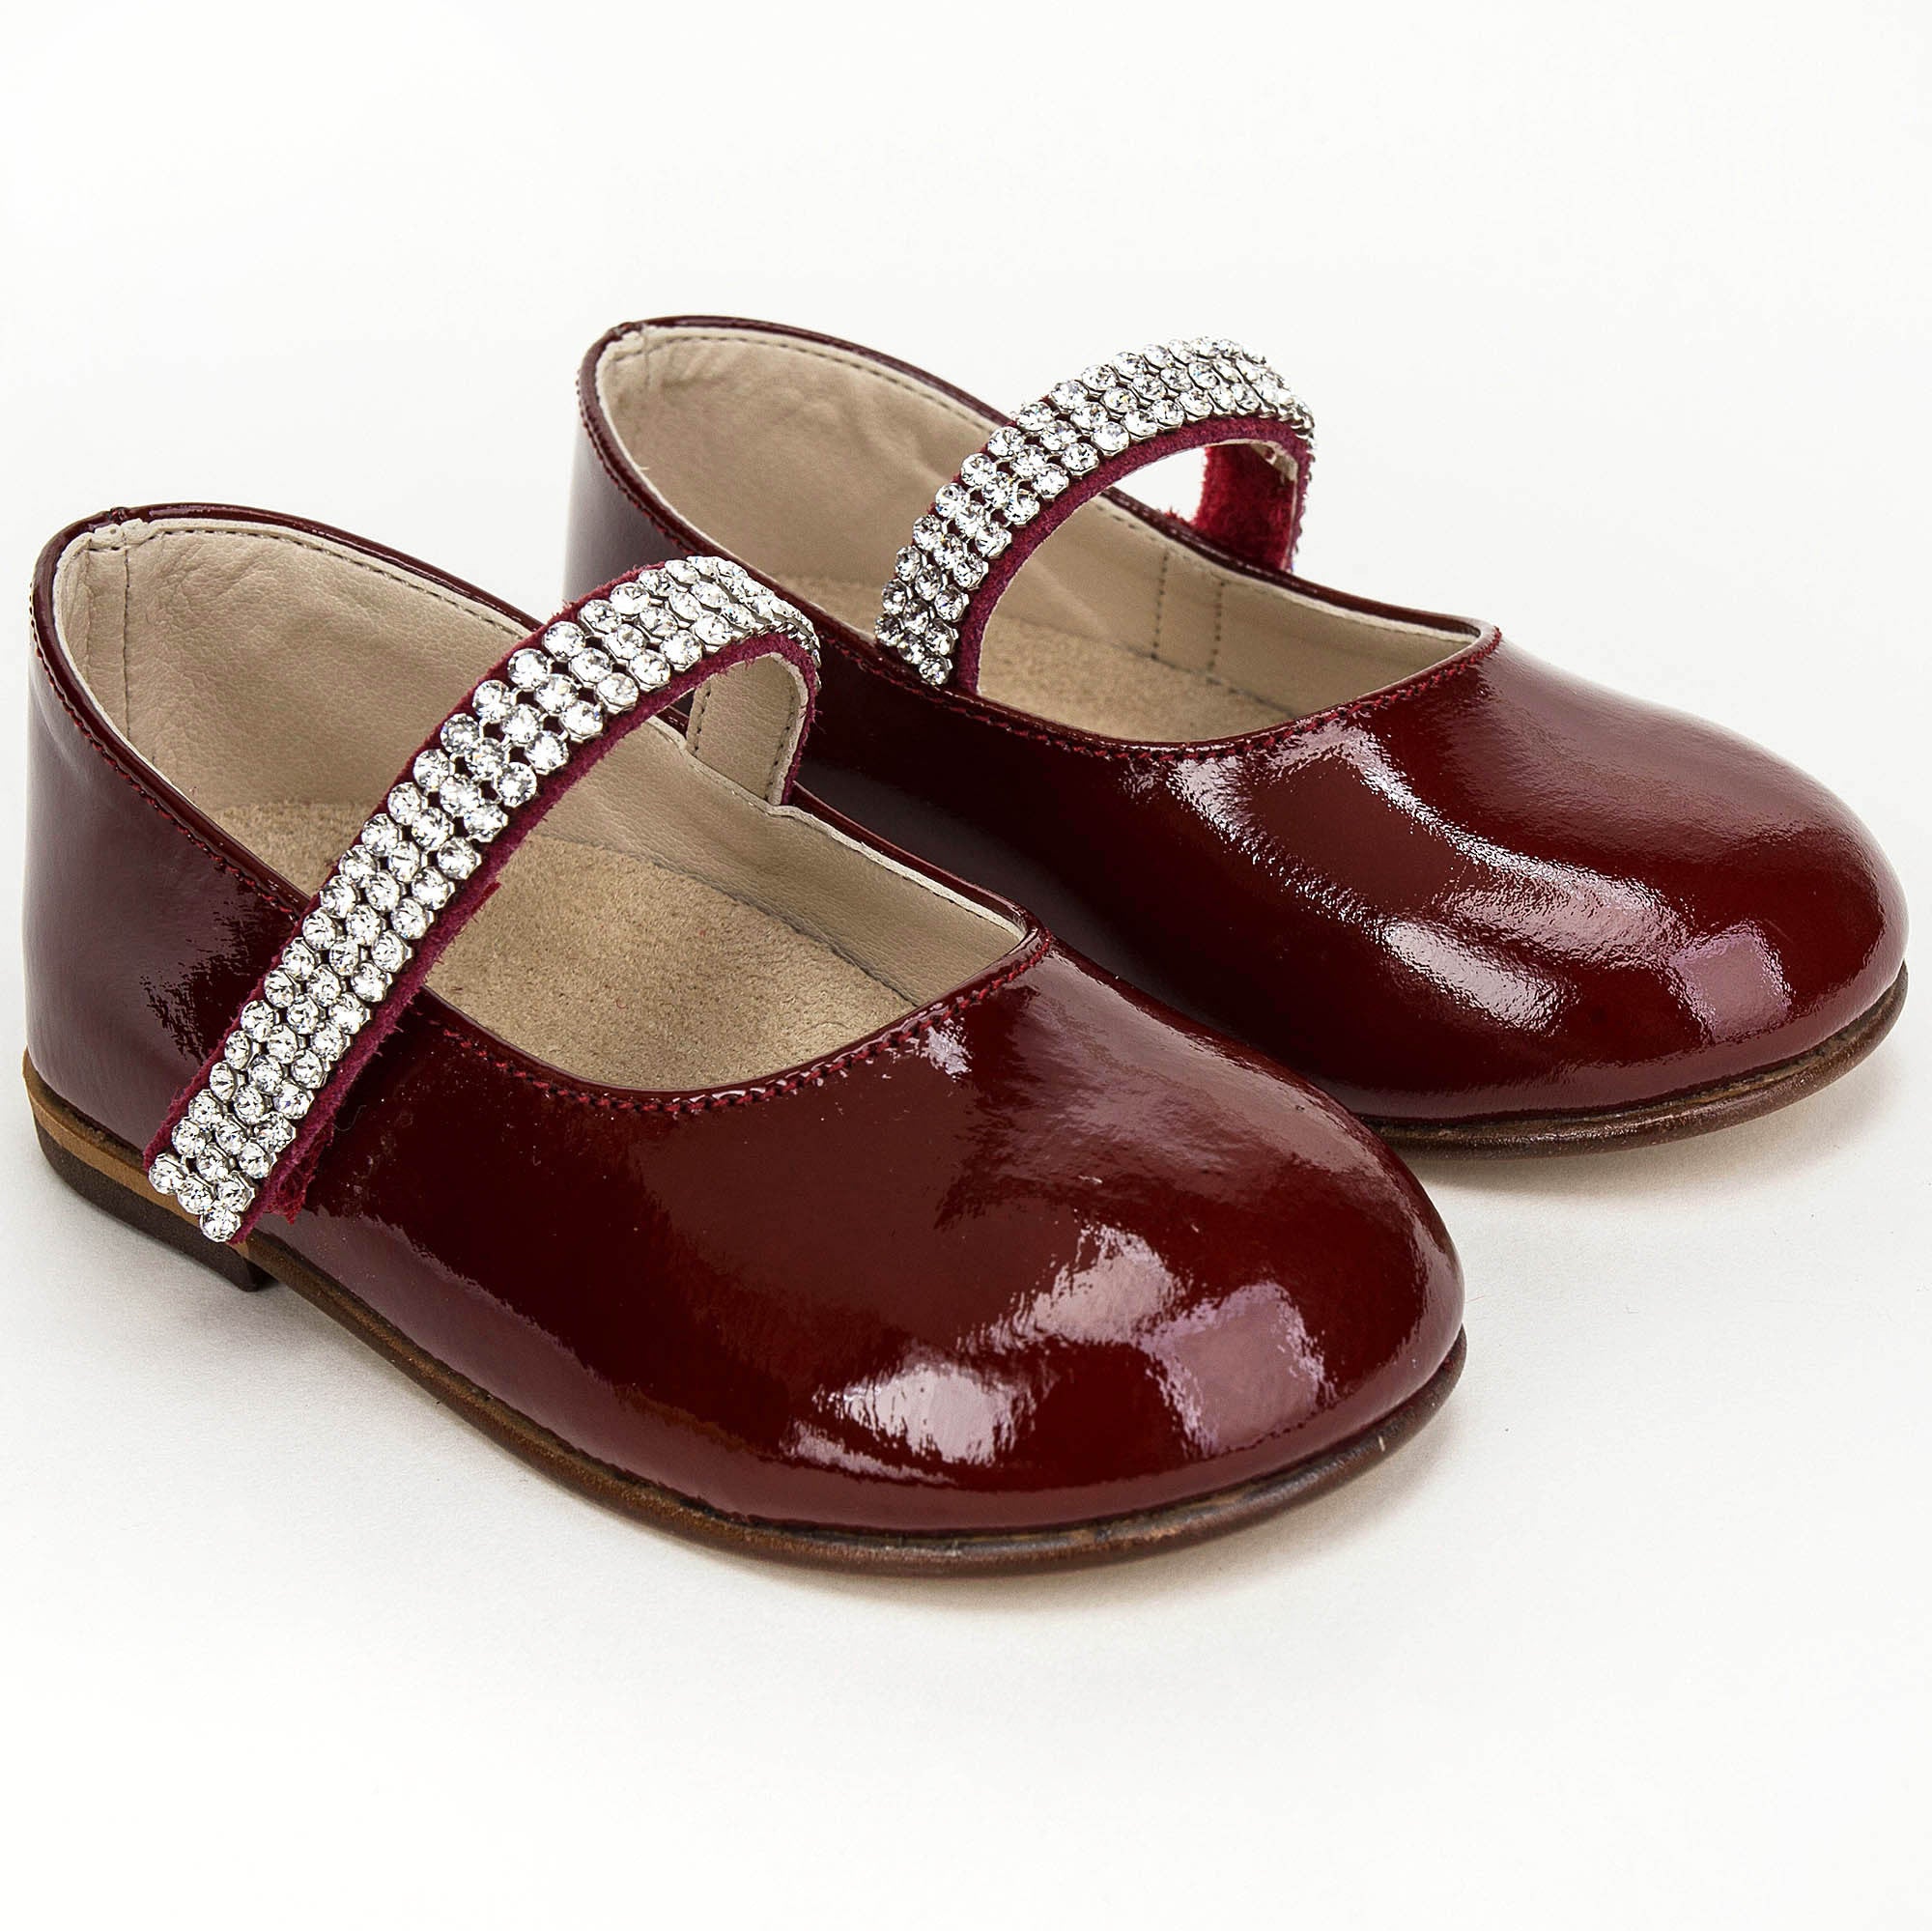 Girls Dark Red Leather Shoes With White Diamond Trims